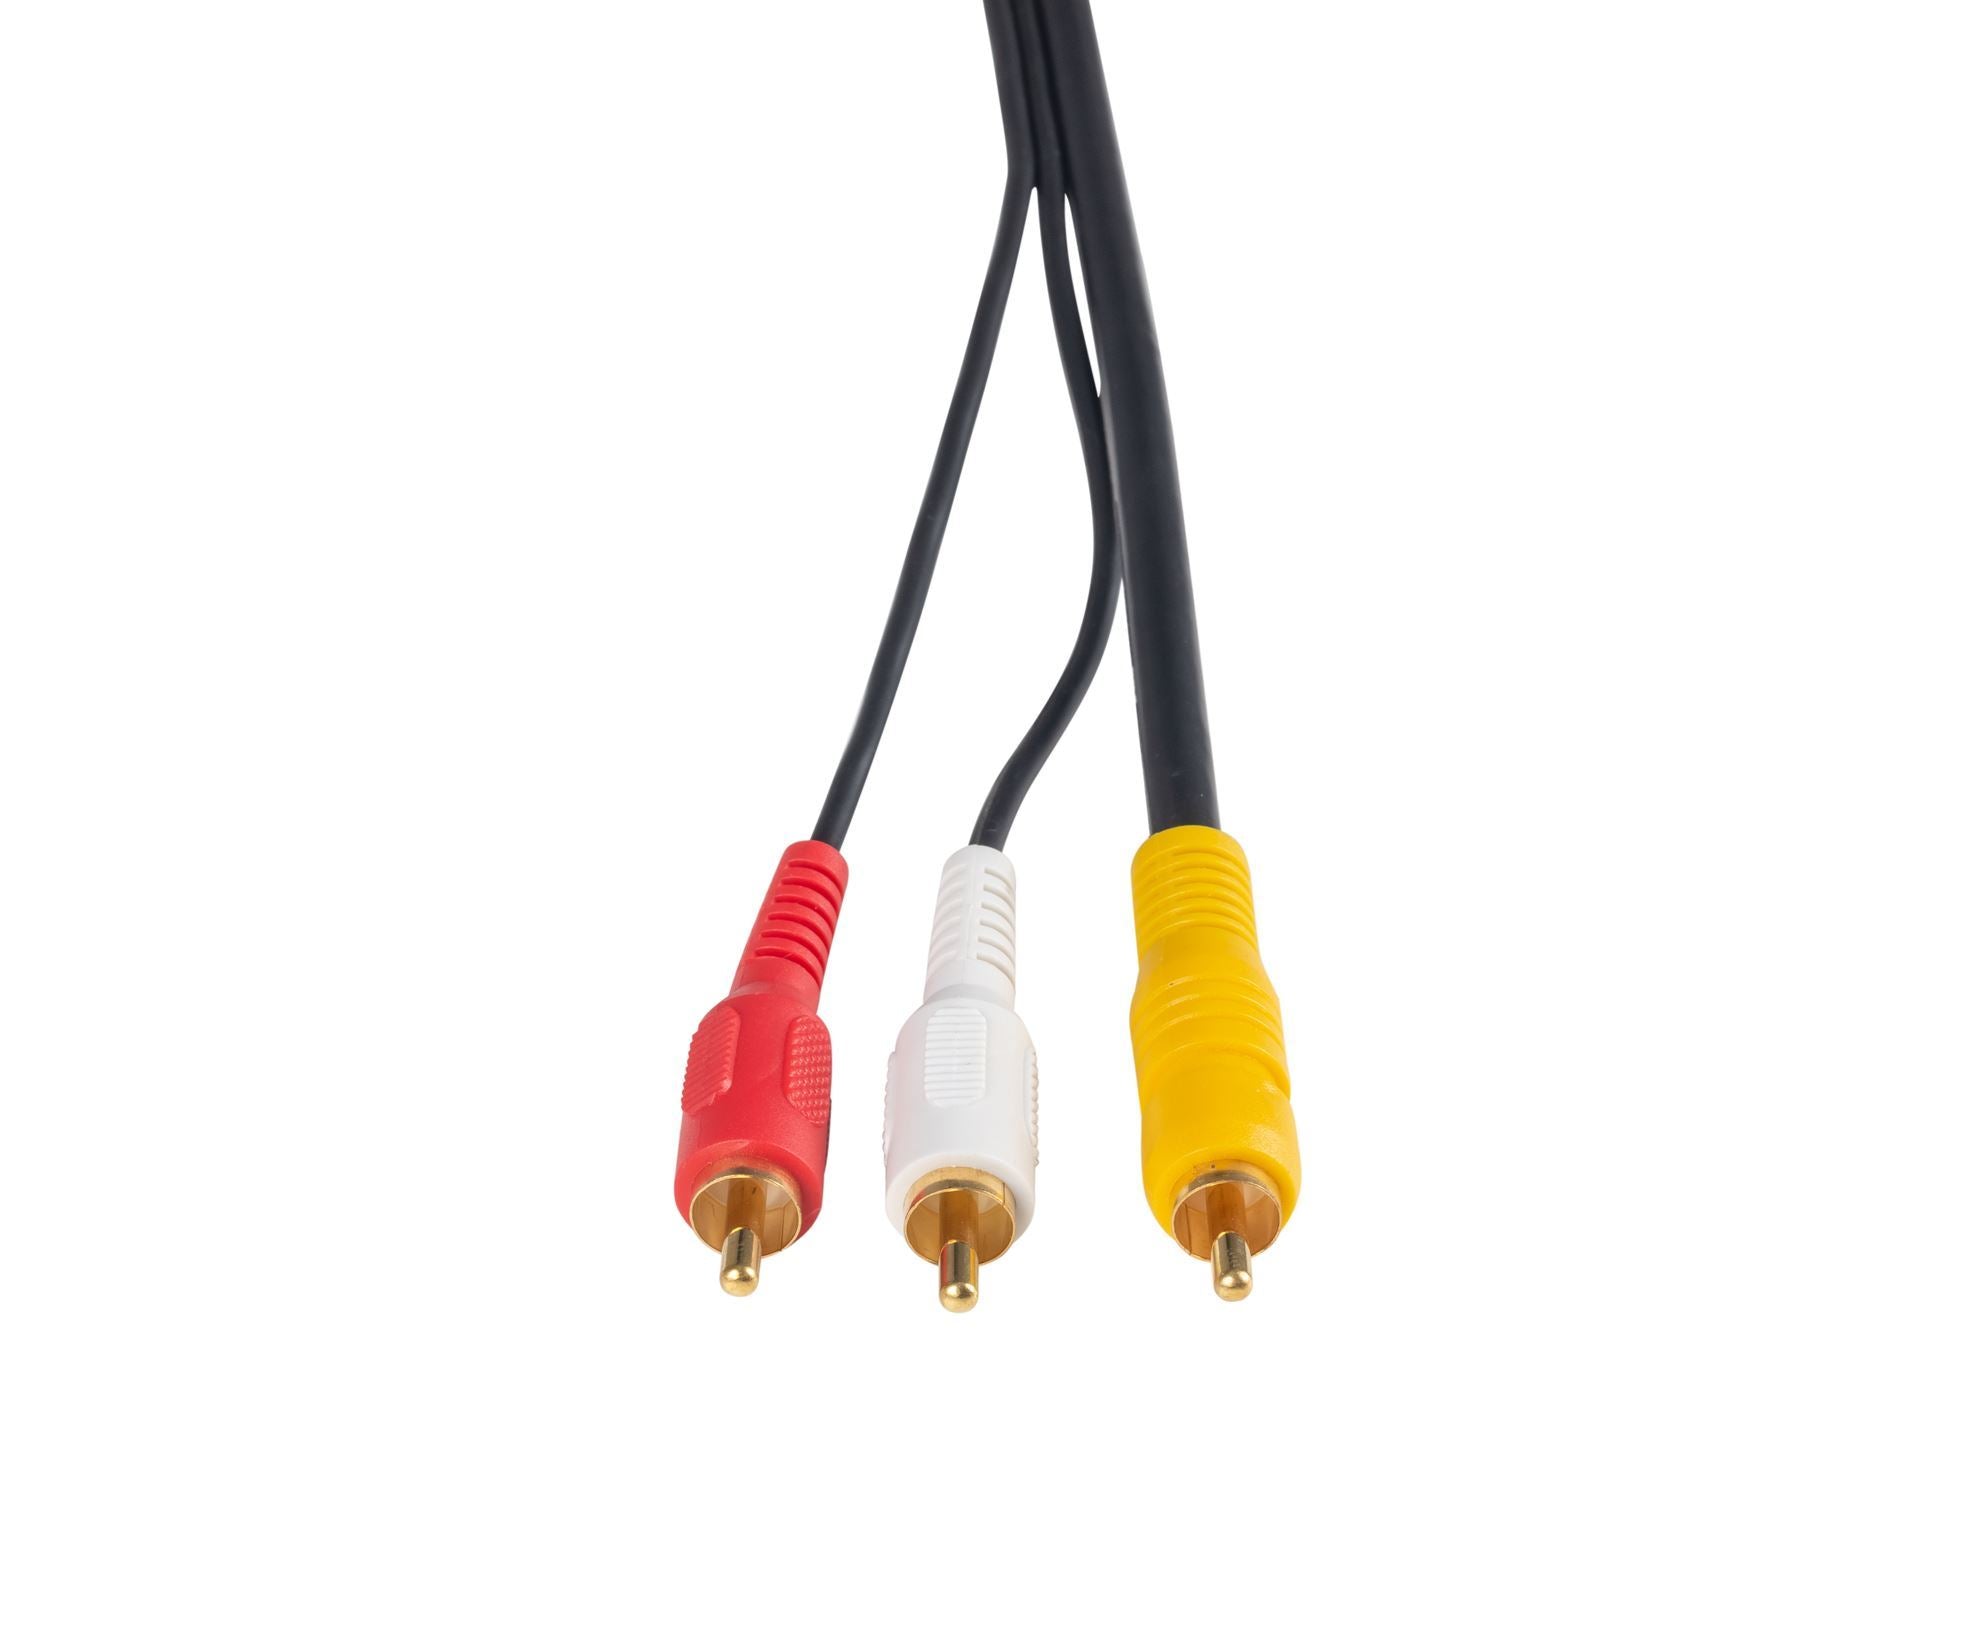 DYNAMIX_20m_RCA_Audio_Video_Cable,_5_to_3_RCA_Plugs._Yellow_RG59_Video,_standard_Red_&_White_audio_with_gold_plated_connectors. 417